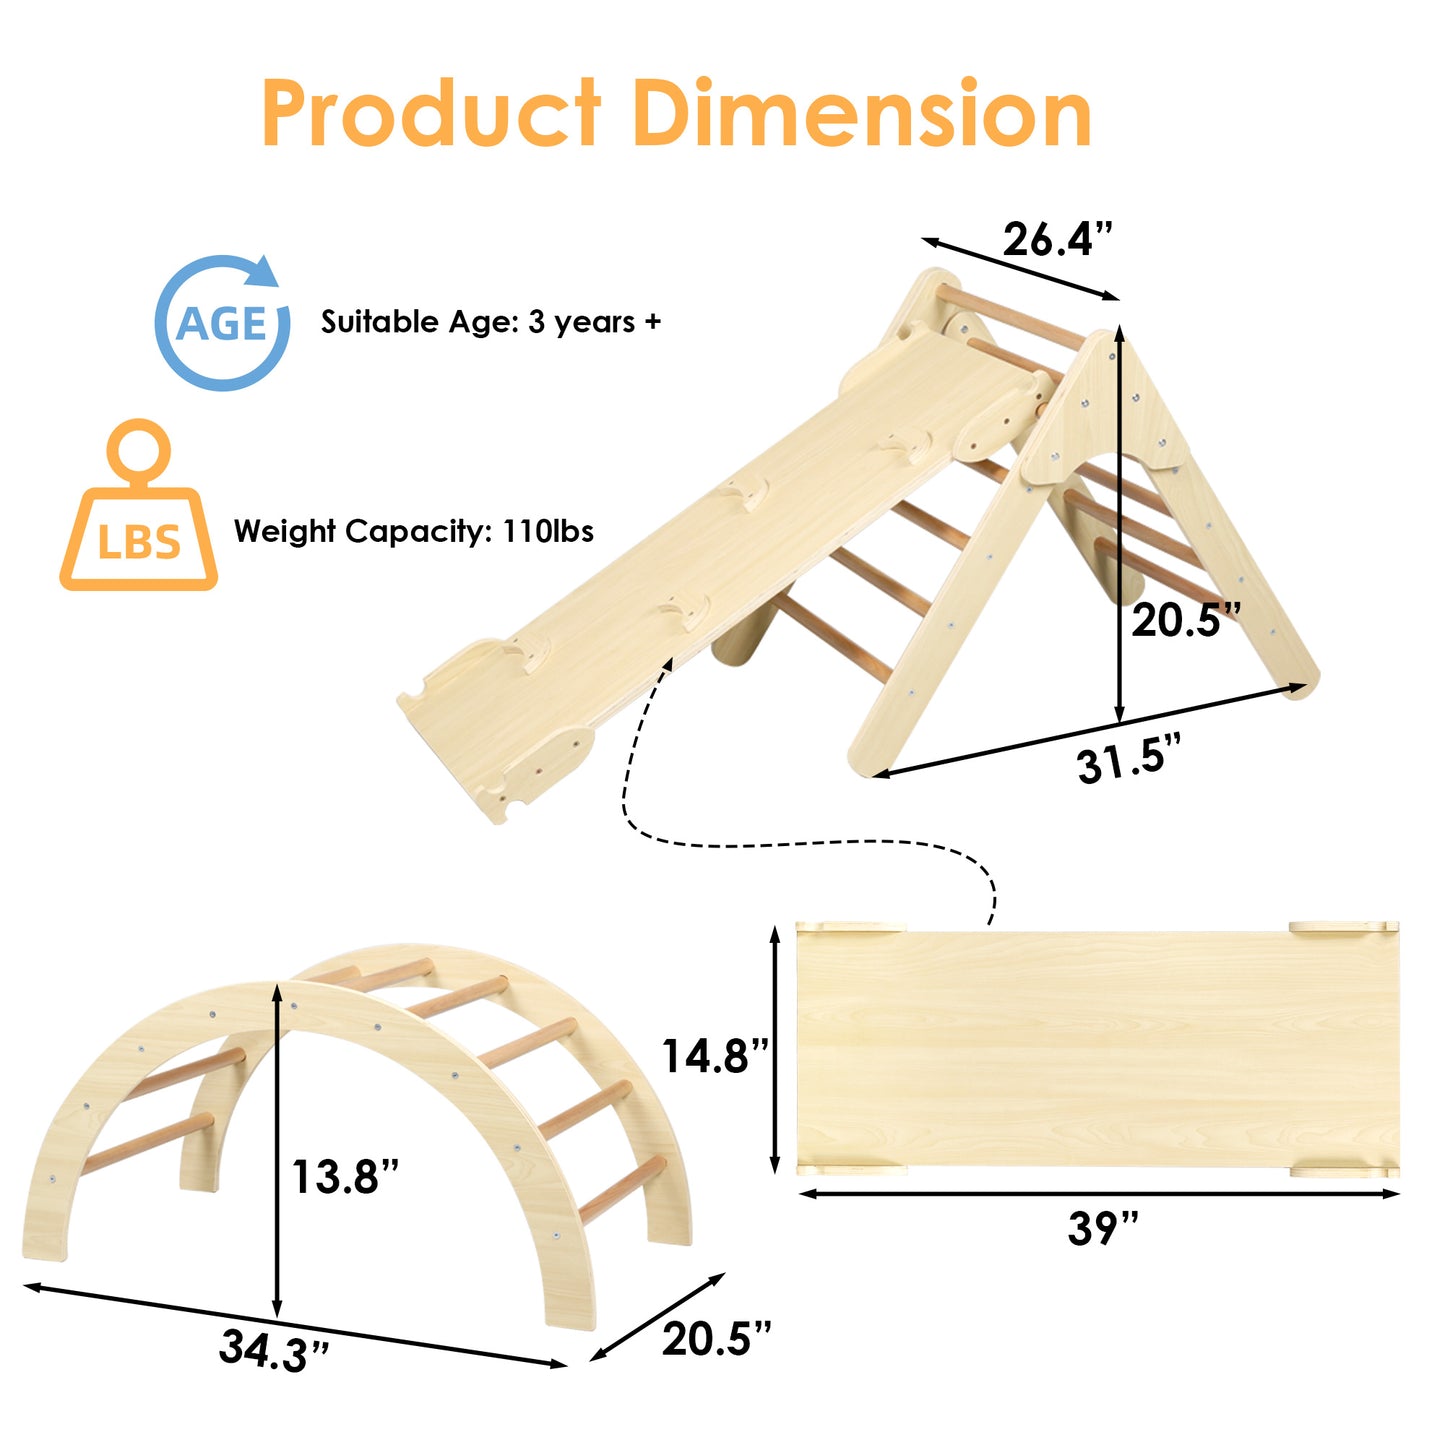 Kids Triangle Climbing Ladder Set for Toddler, 6 in 1 Indoor Wooden Children Playground Climber Toys with Adjustable Ramp/Slide, Natural